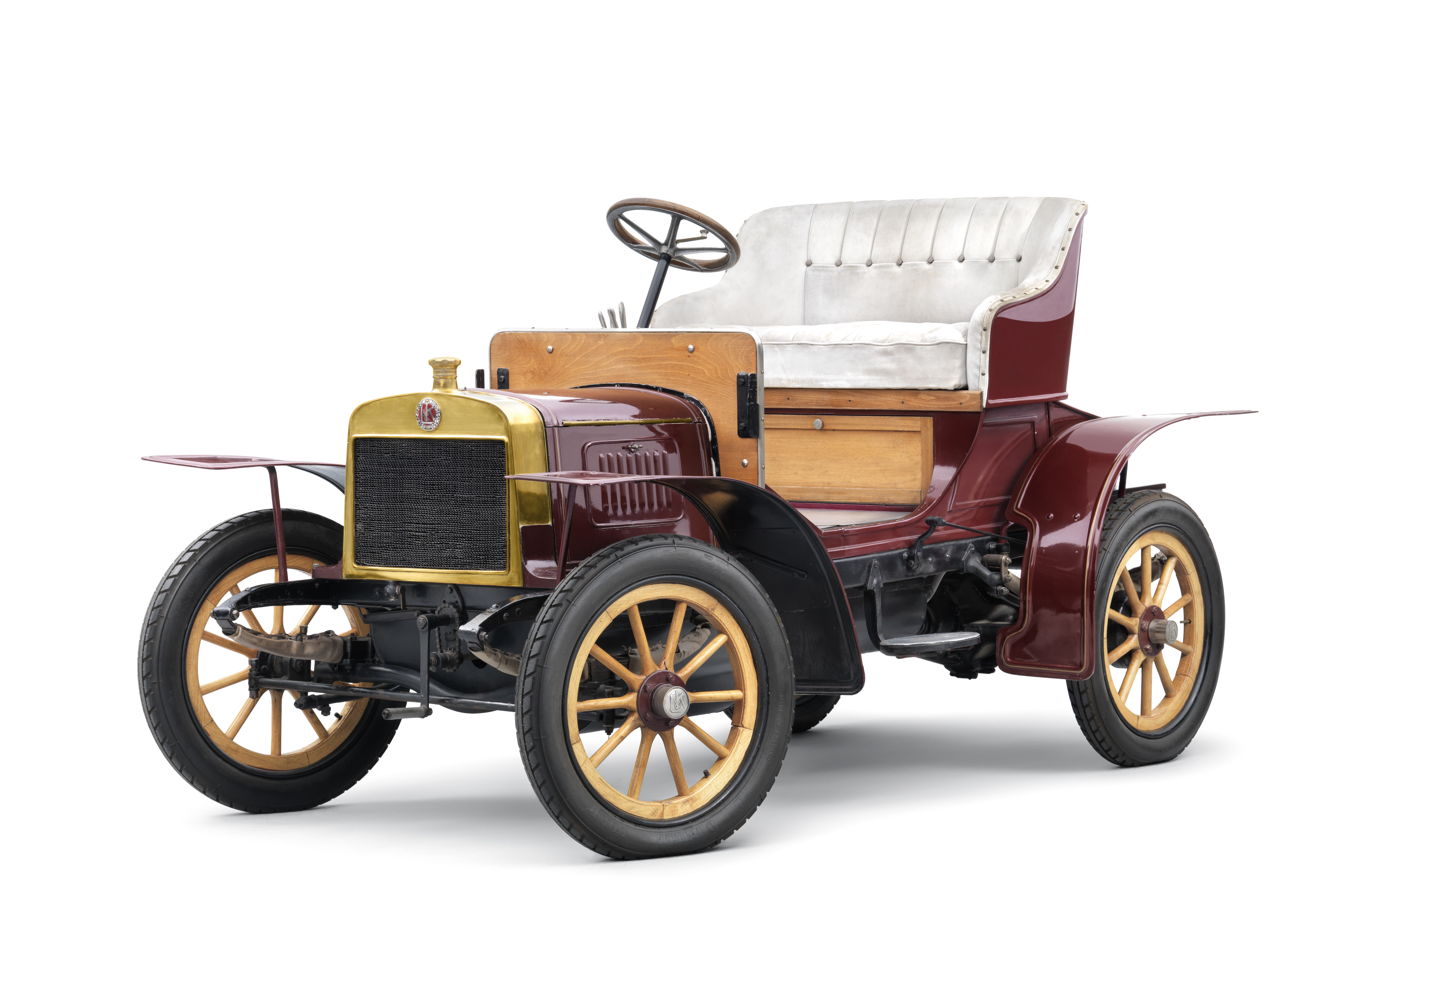 The first Laurin & Klement automobile, the Voiturette A, made its debut as early as 1905. It quickly proved to be a high-quality everyday vehicle with an excellent price-performance ratio.